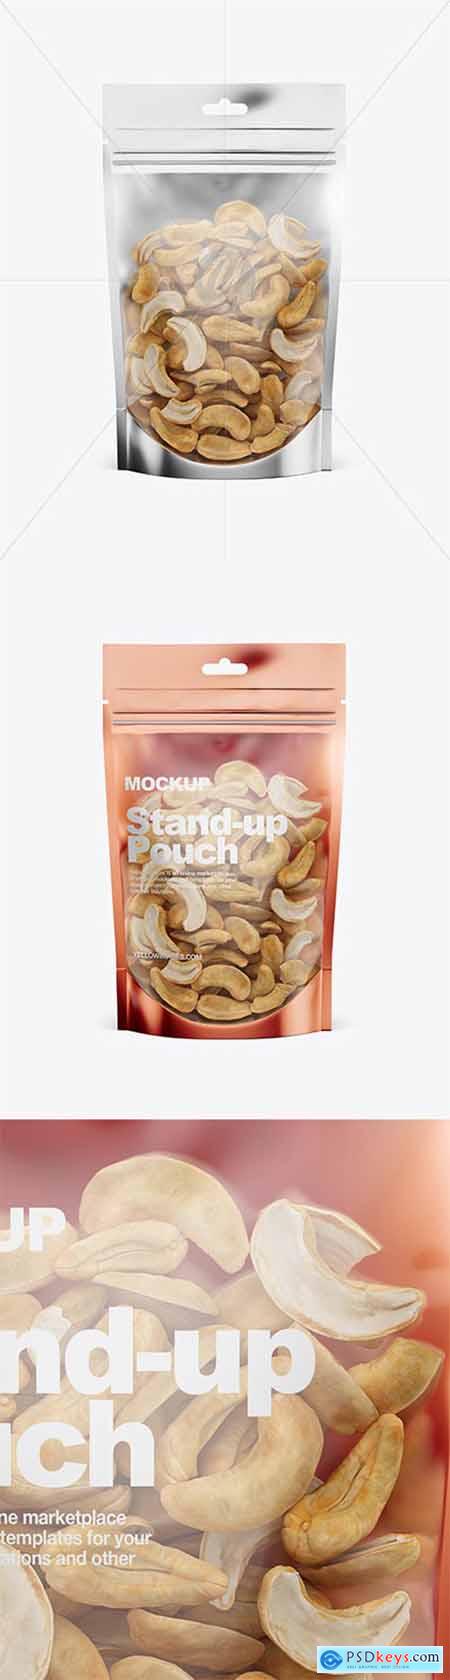 Download Glossy Transparent Stand-Up Pouch W- Cashew Nuts Mockup ...